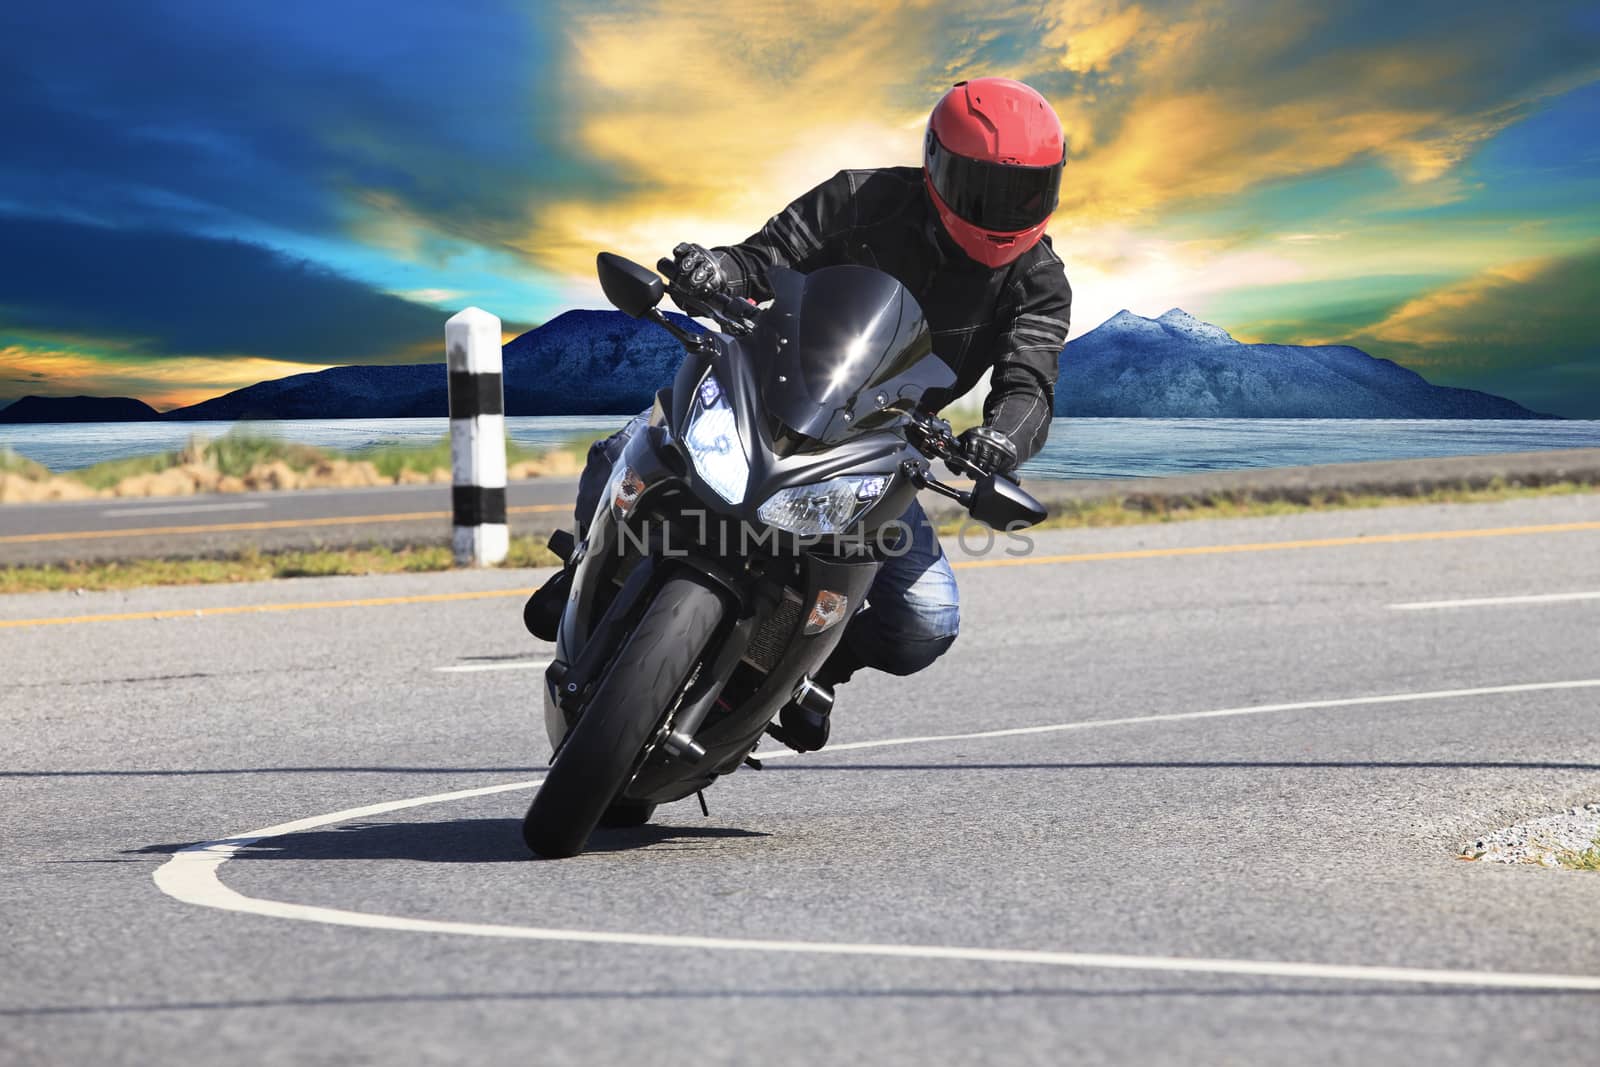 young man riding motorcycle in asphalt road curve with rural and by khunaspix